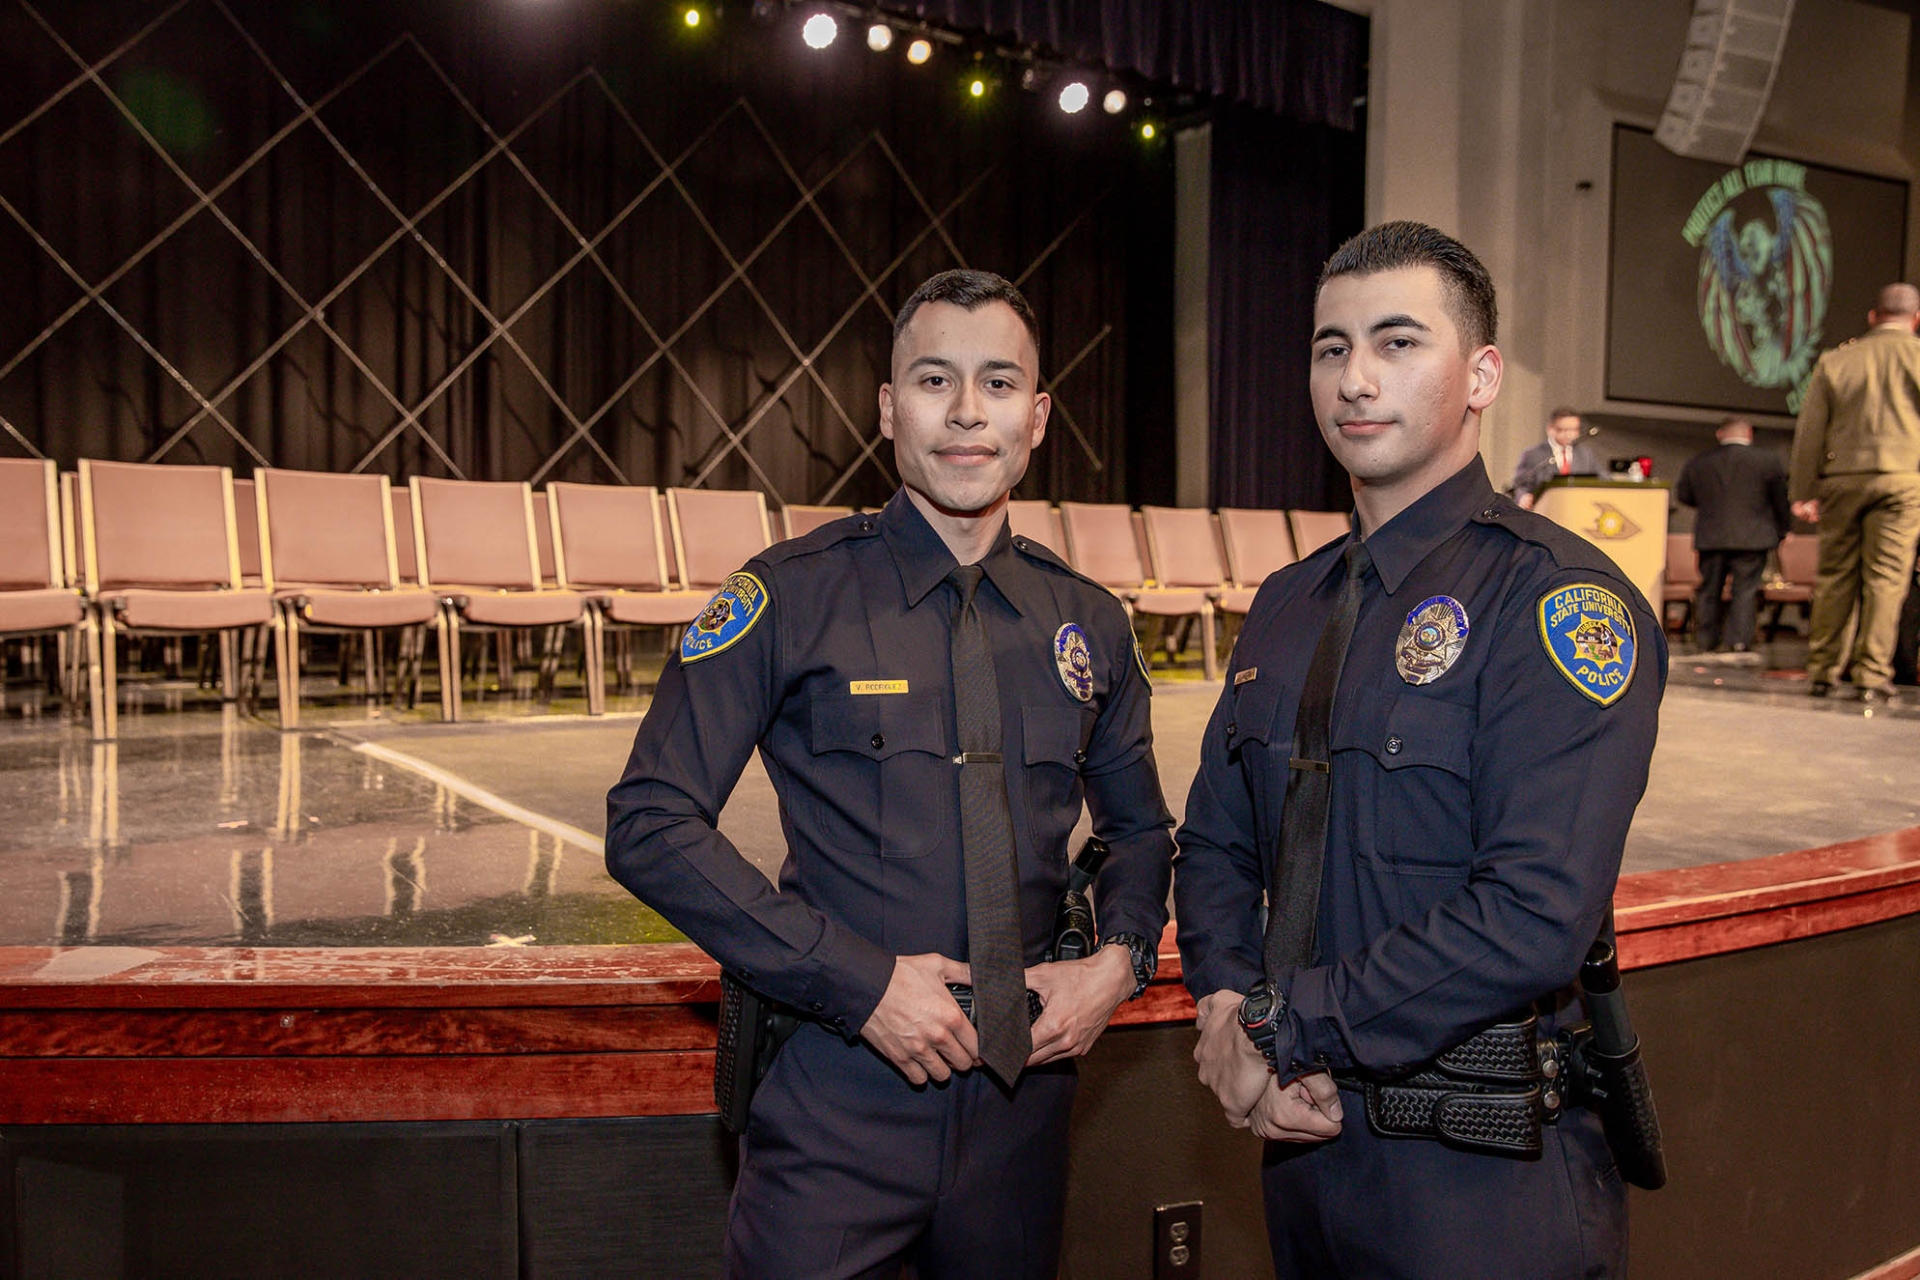 CSUSB police officers Victor Rodriguez, left, and Raudel Garcia-Reynoso at their San Bernardino County Sheriff’s Office’s Basic Law Enforcement Academy in 2023. Both are are CSUSB alumni who are now part of the UPD force under a under a partnership with the department and the School of Criminology and Criminal Justice.